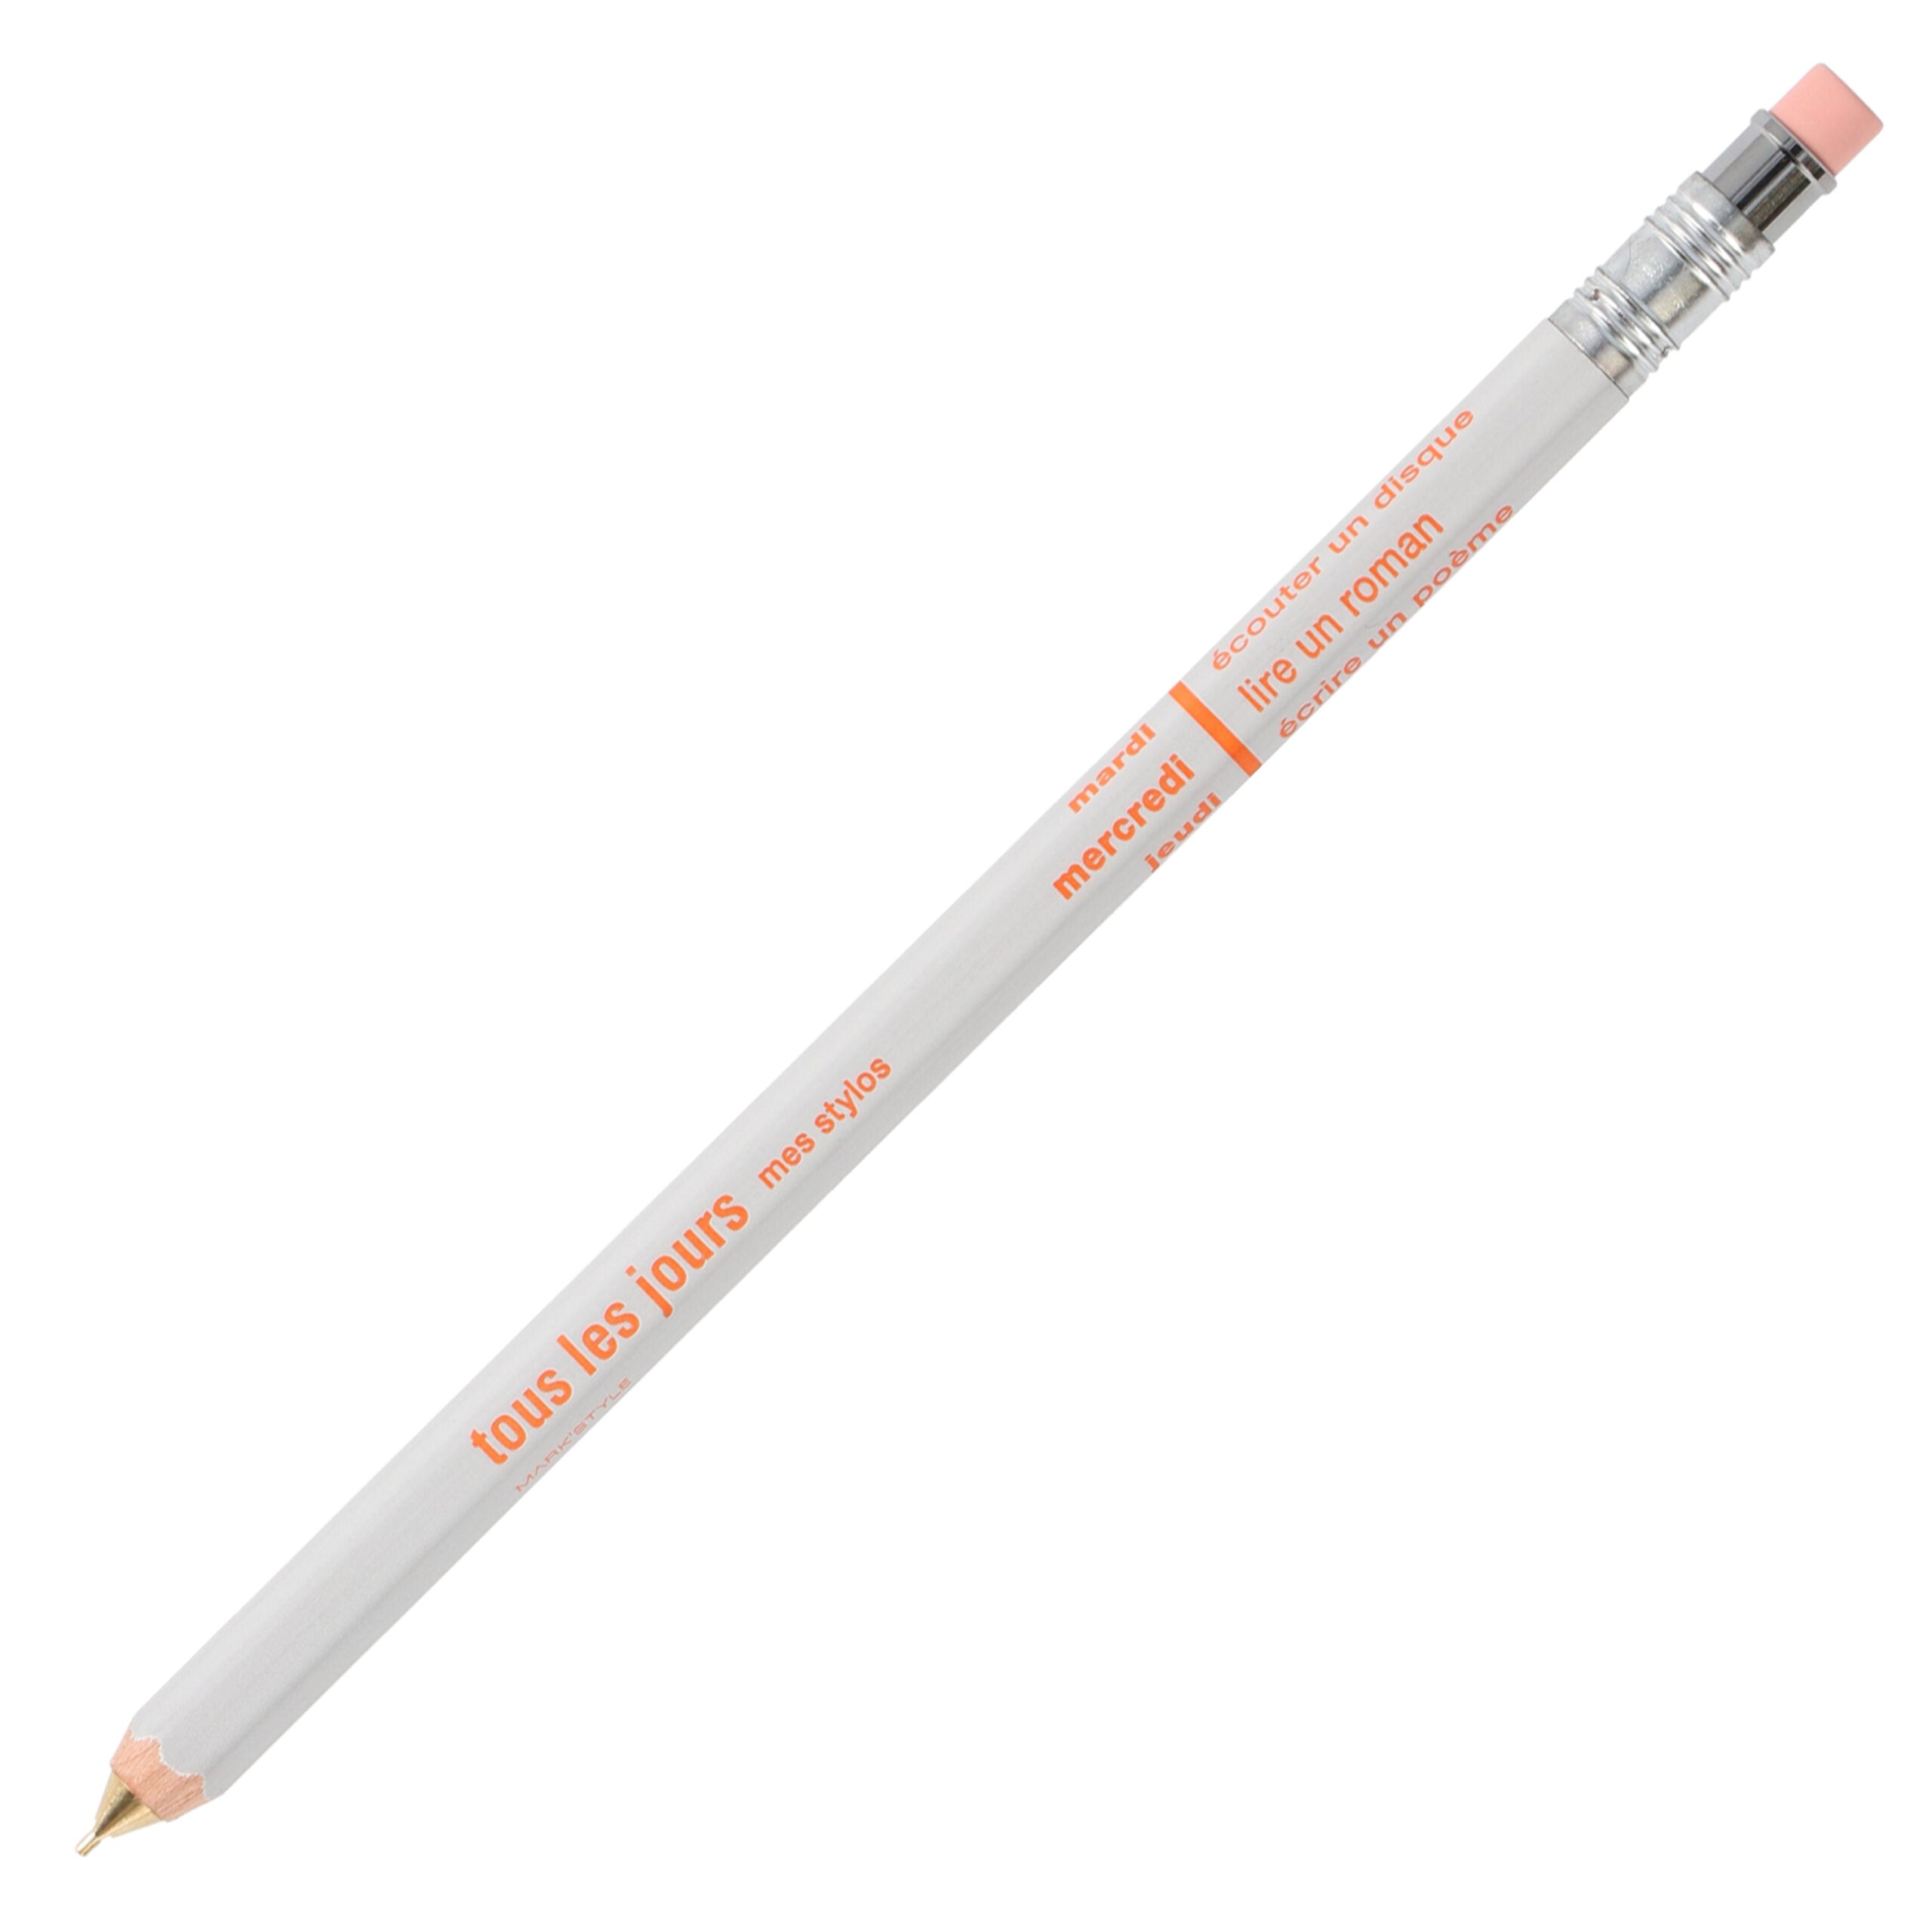 Day's Mechanical Pencil 0.5 mm (available in 5 colors)